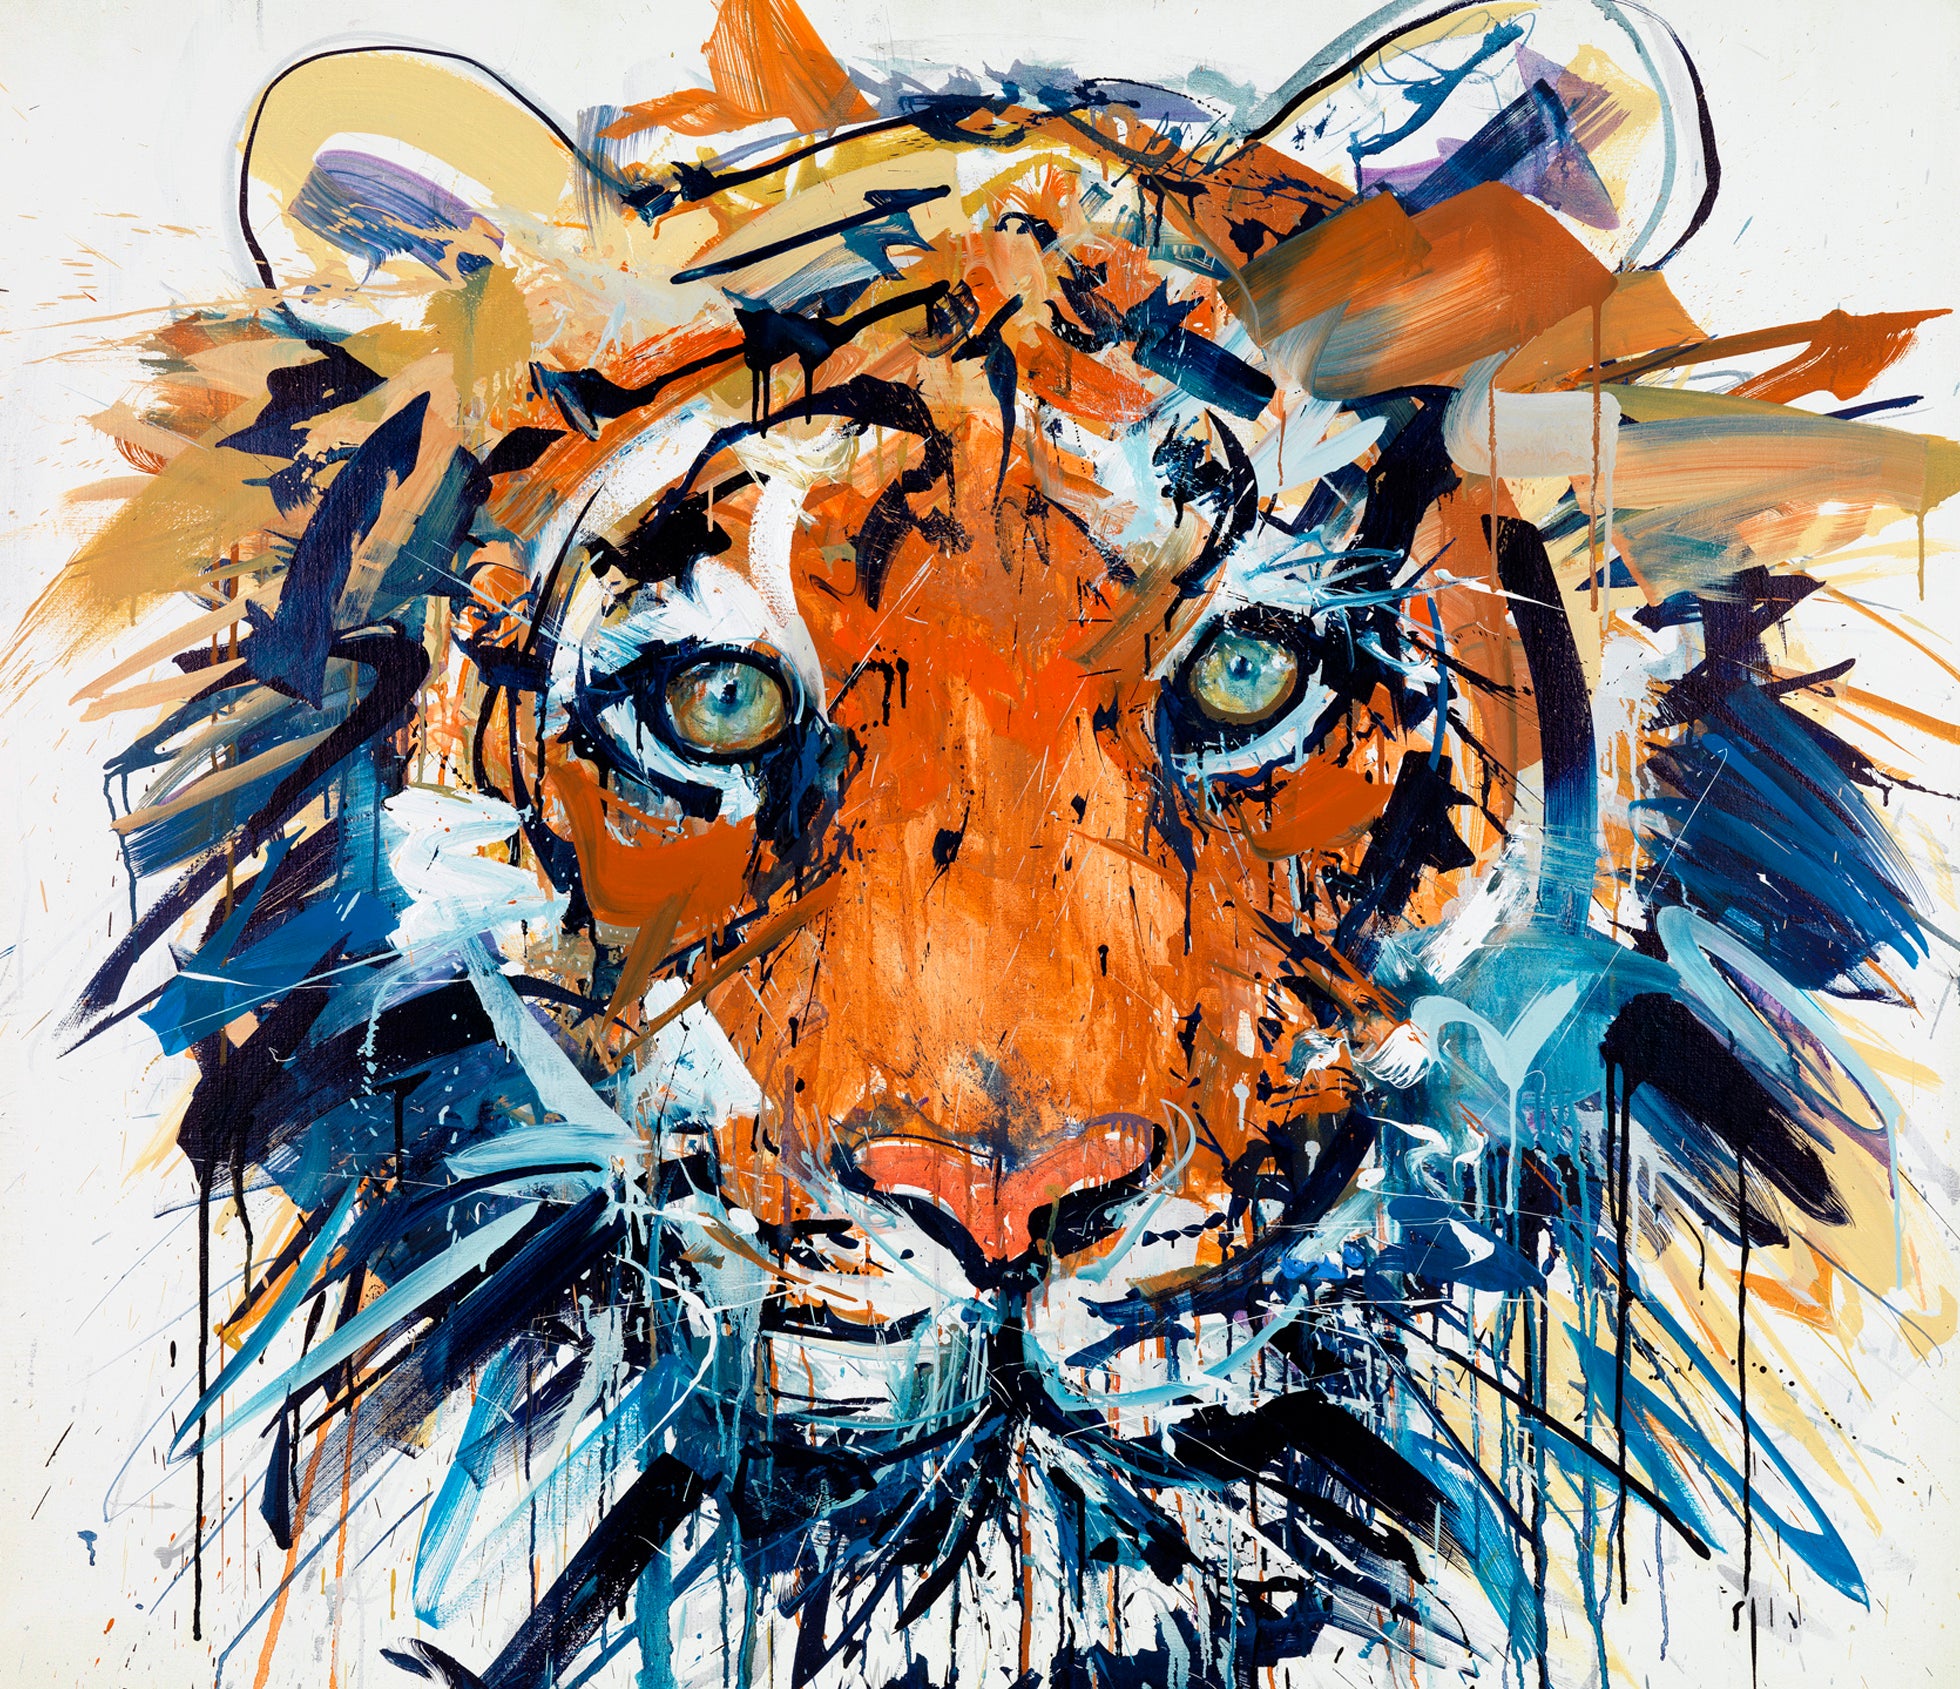 Dave White's 'Tiger' is larger than life